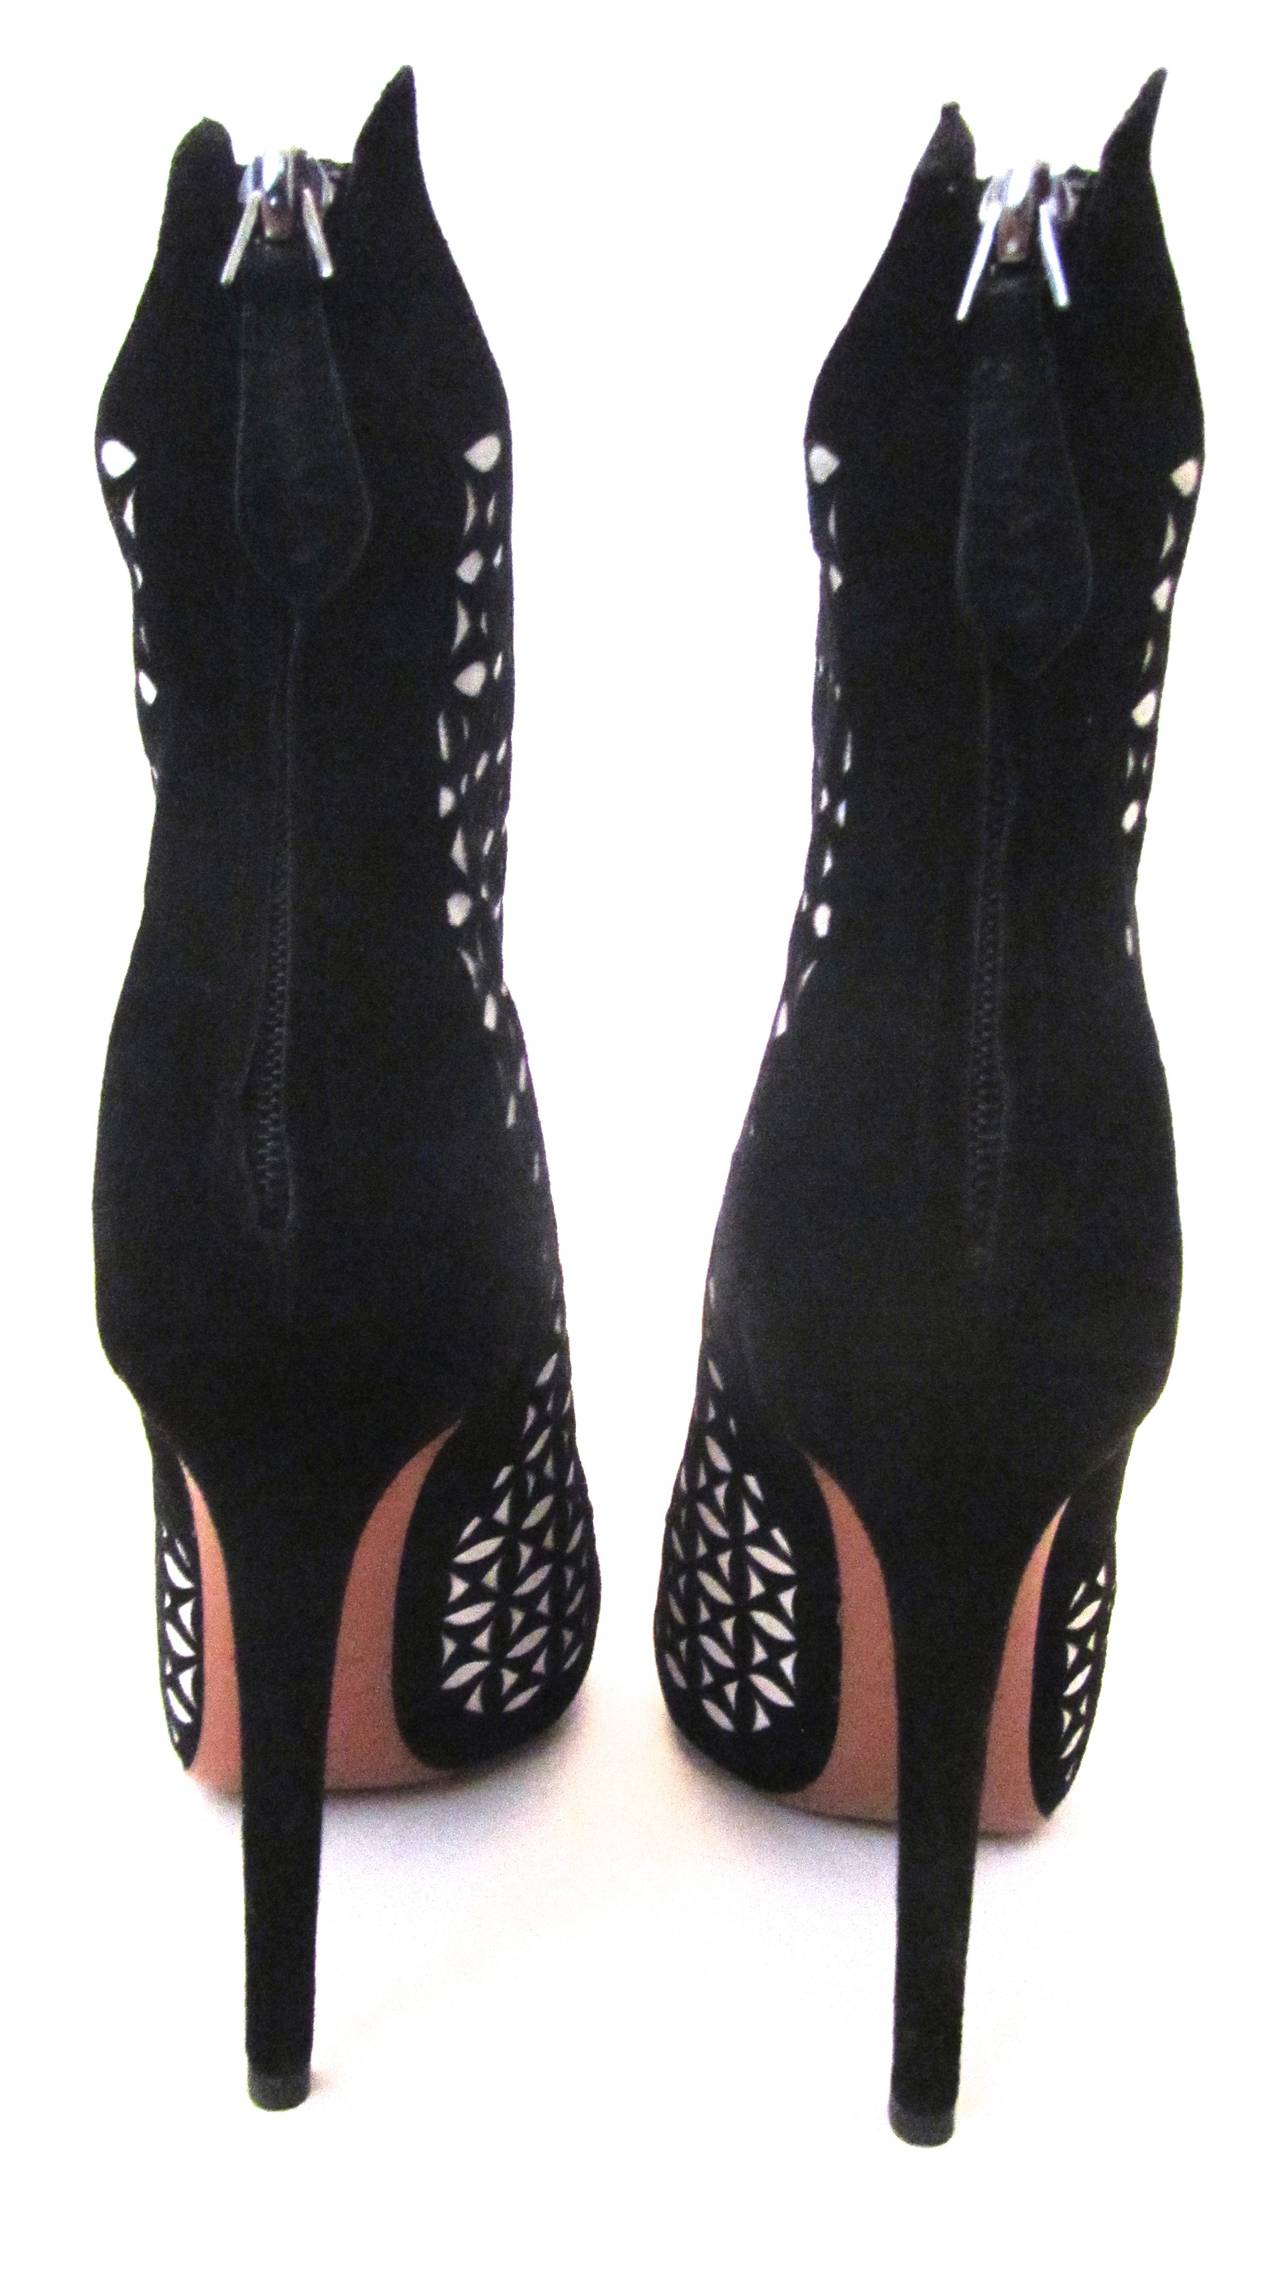 New Alaia Open Toed High Heel Boots - 37 - Black and White Suede For Sale 1